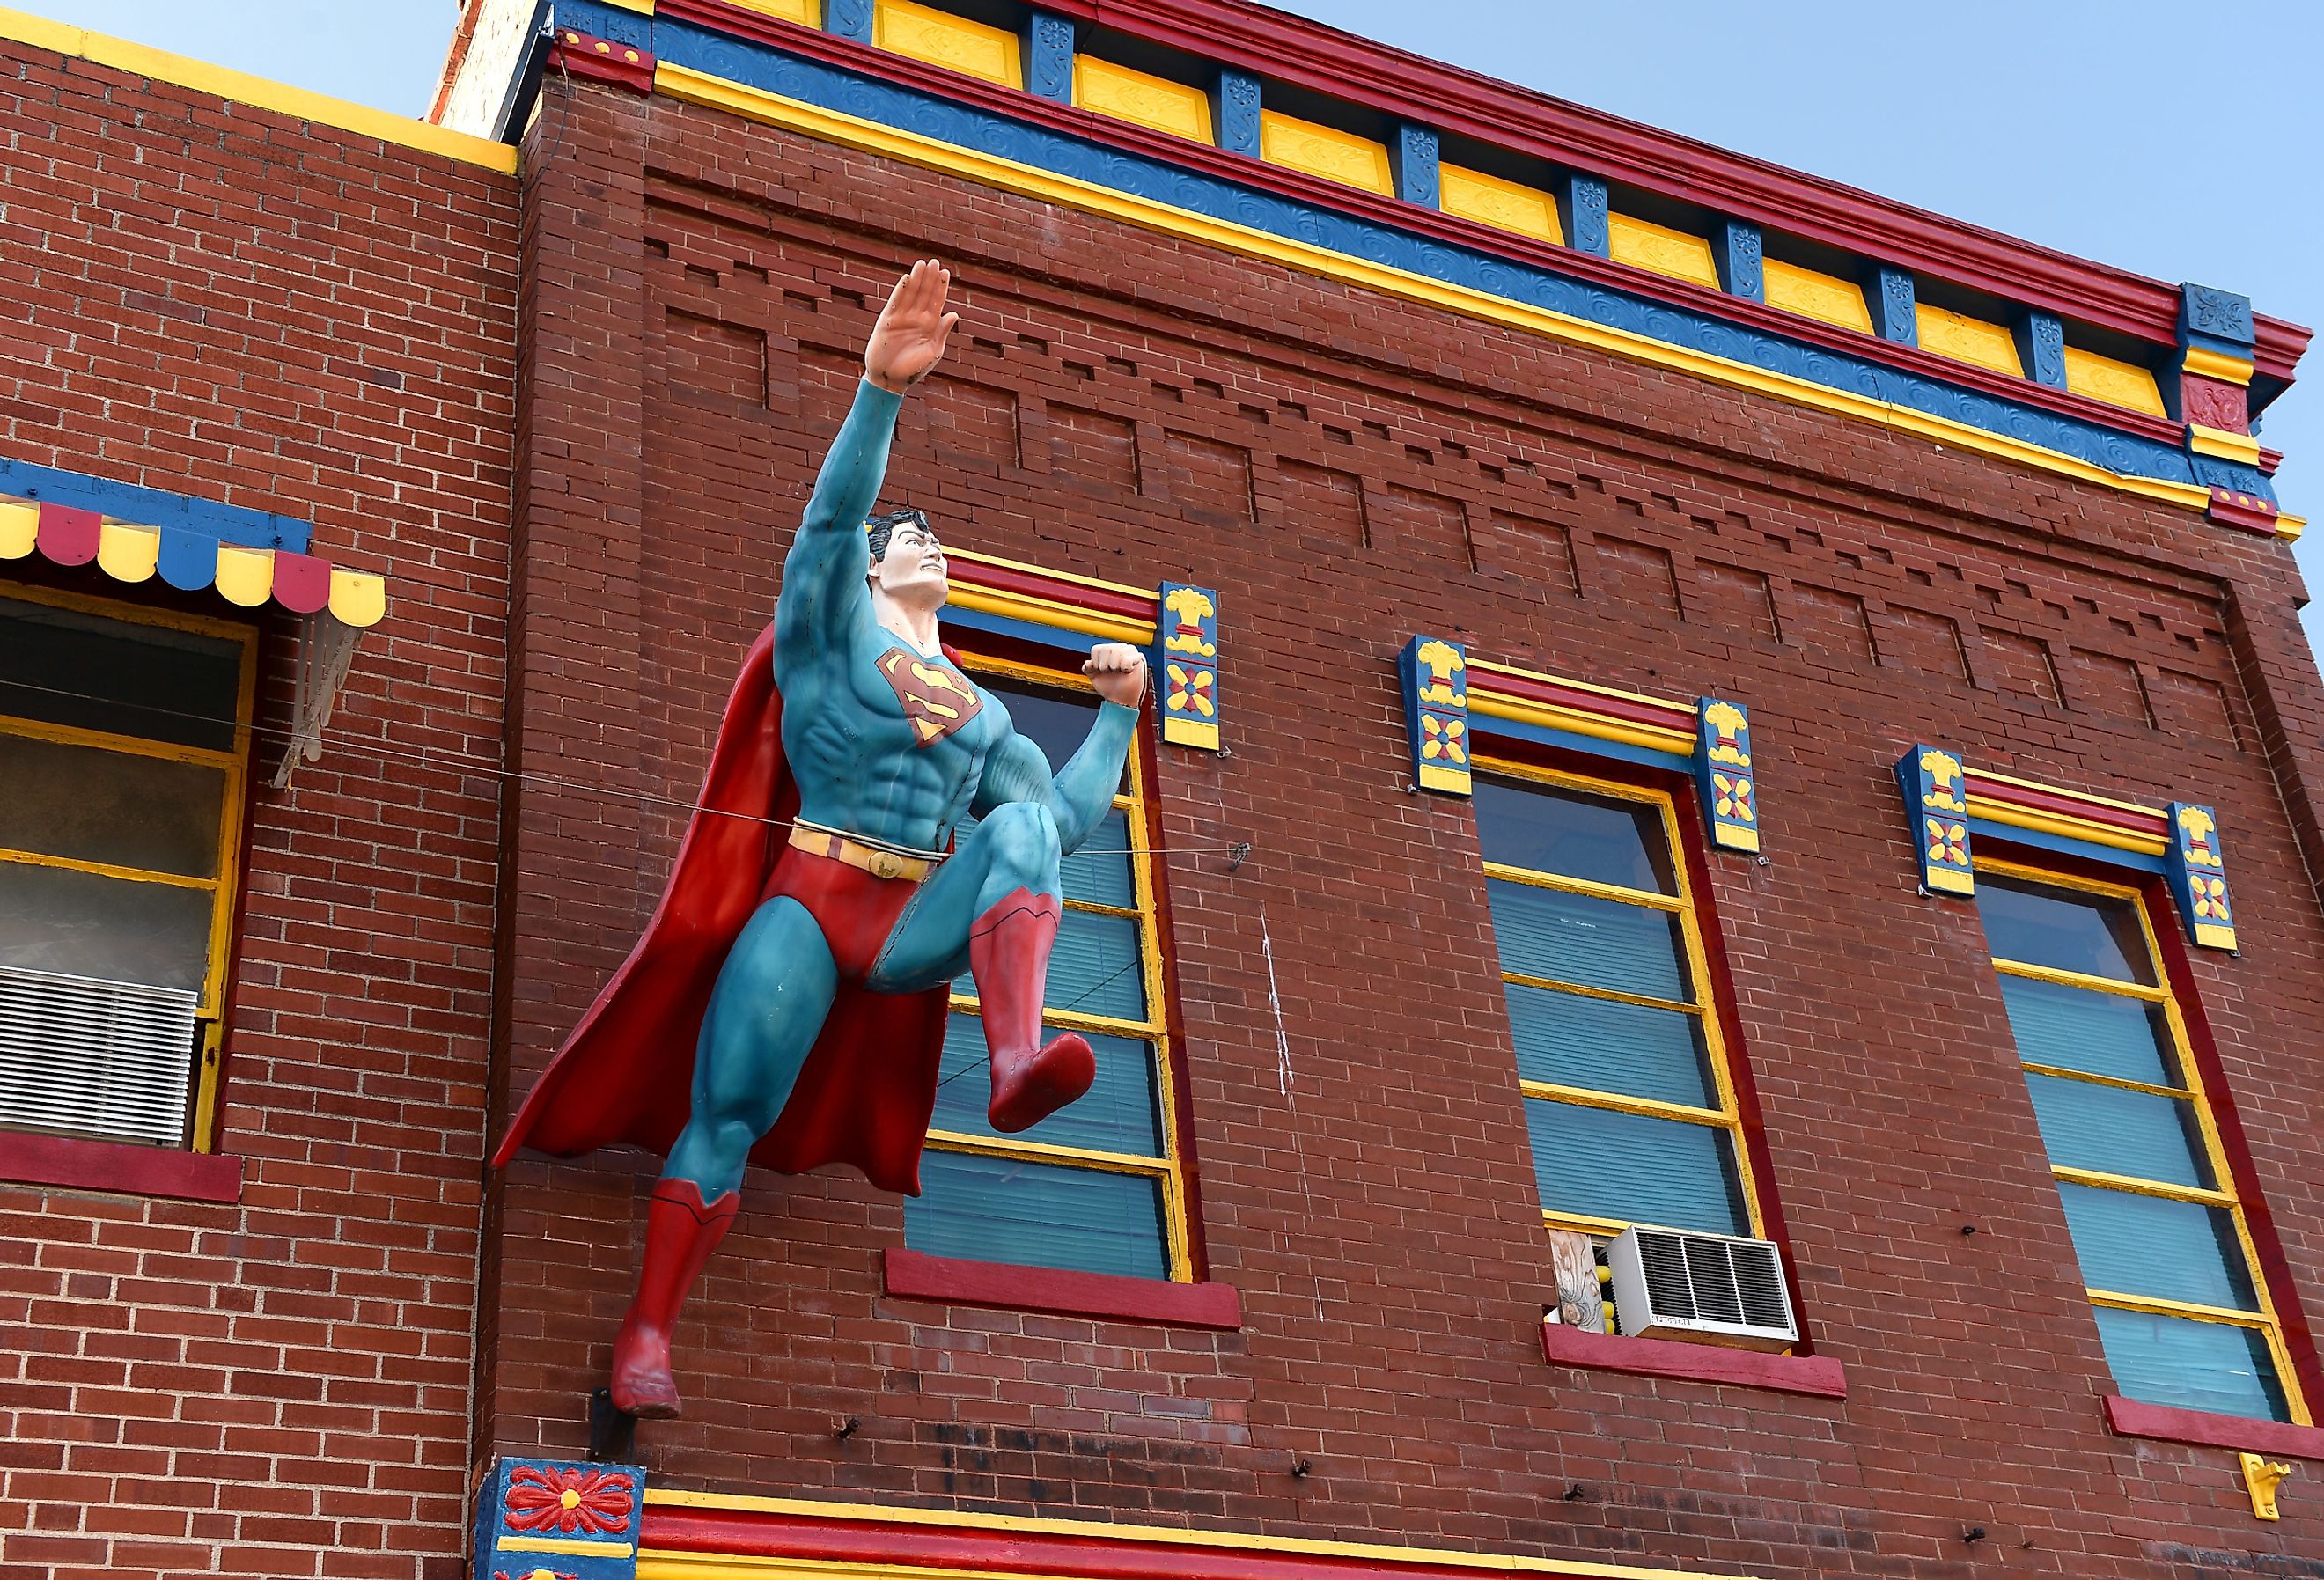 Statue of Superman flying outside the Super Museum in Metropolis, Illinois. Image credit Gino Santa Maria via Shutterstock.